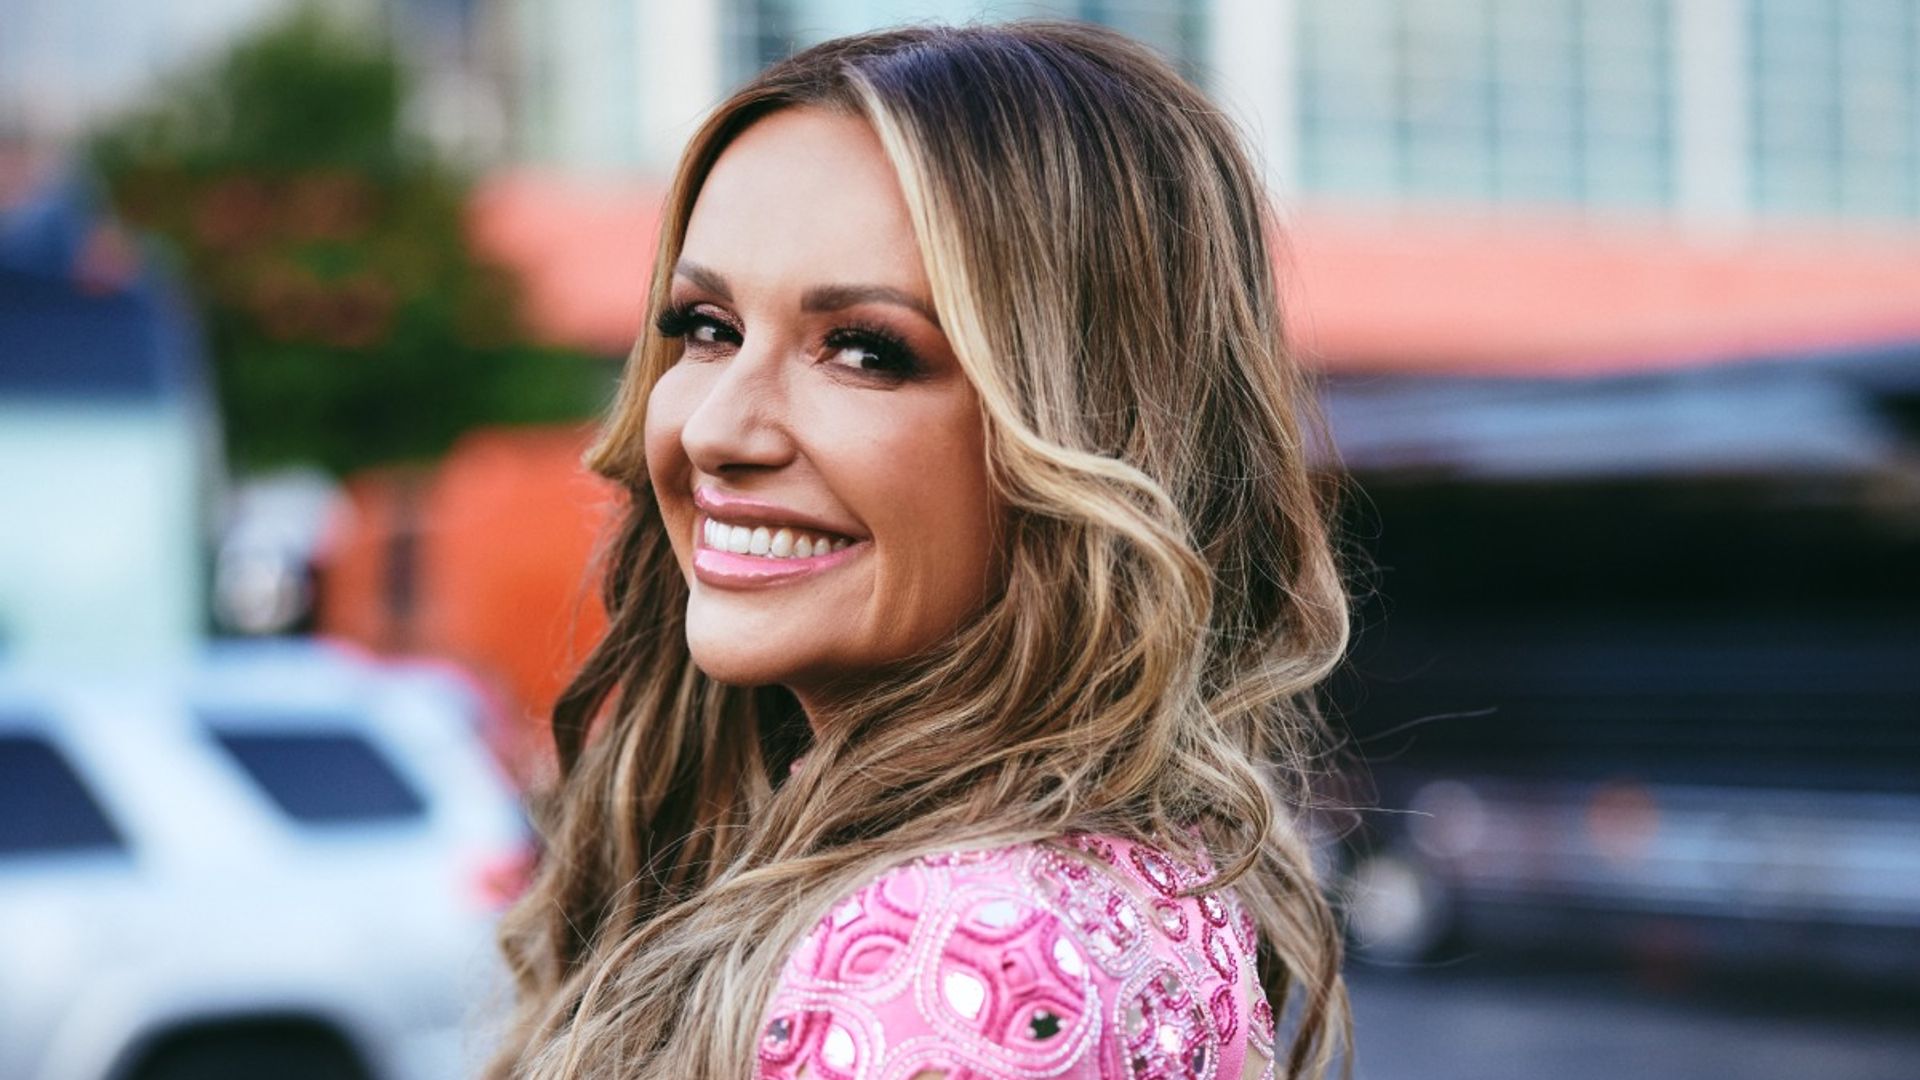 Carly Pearce to host ACM Honors for second year in a row